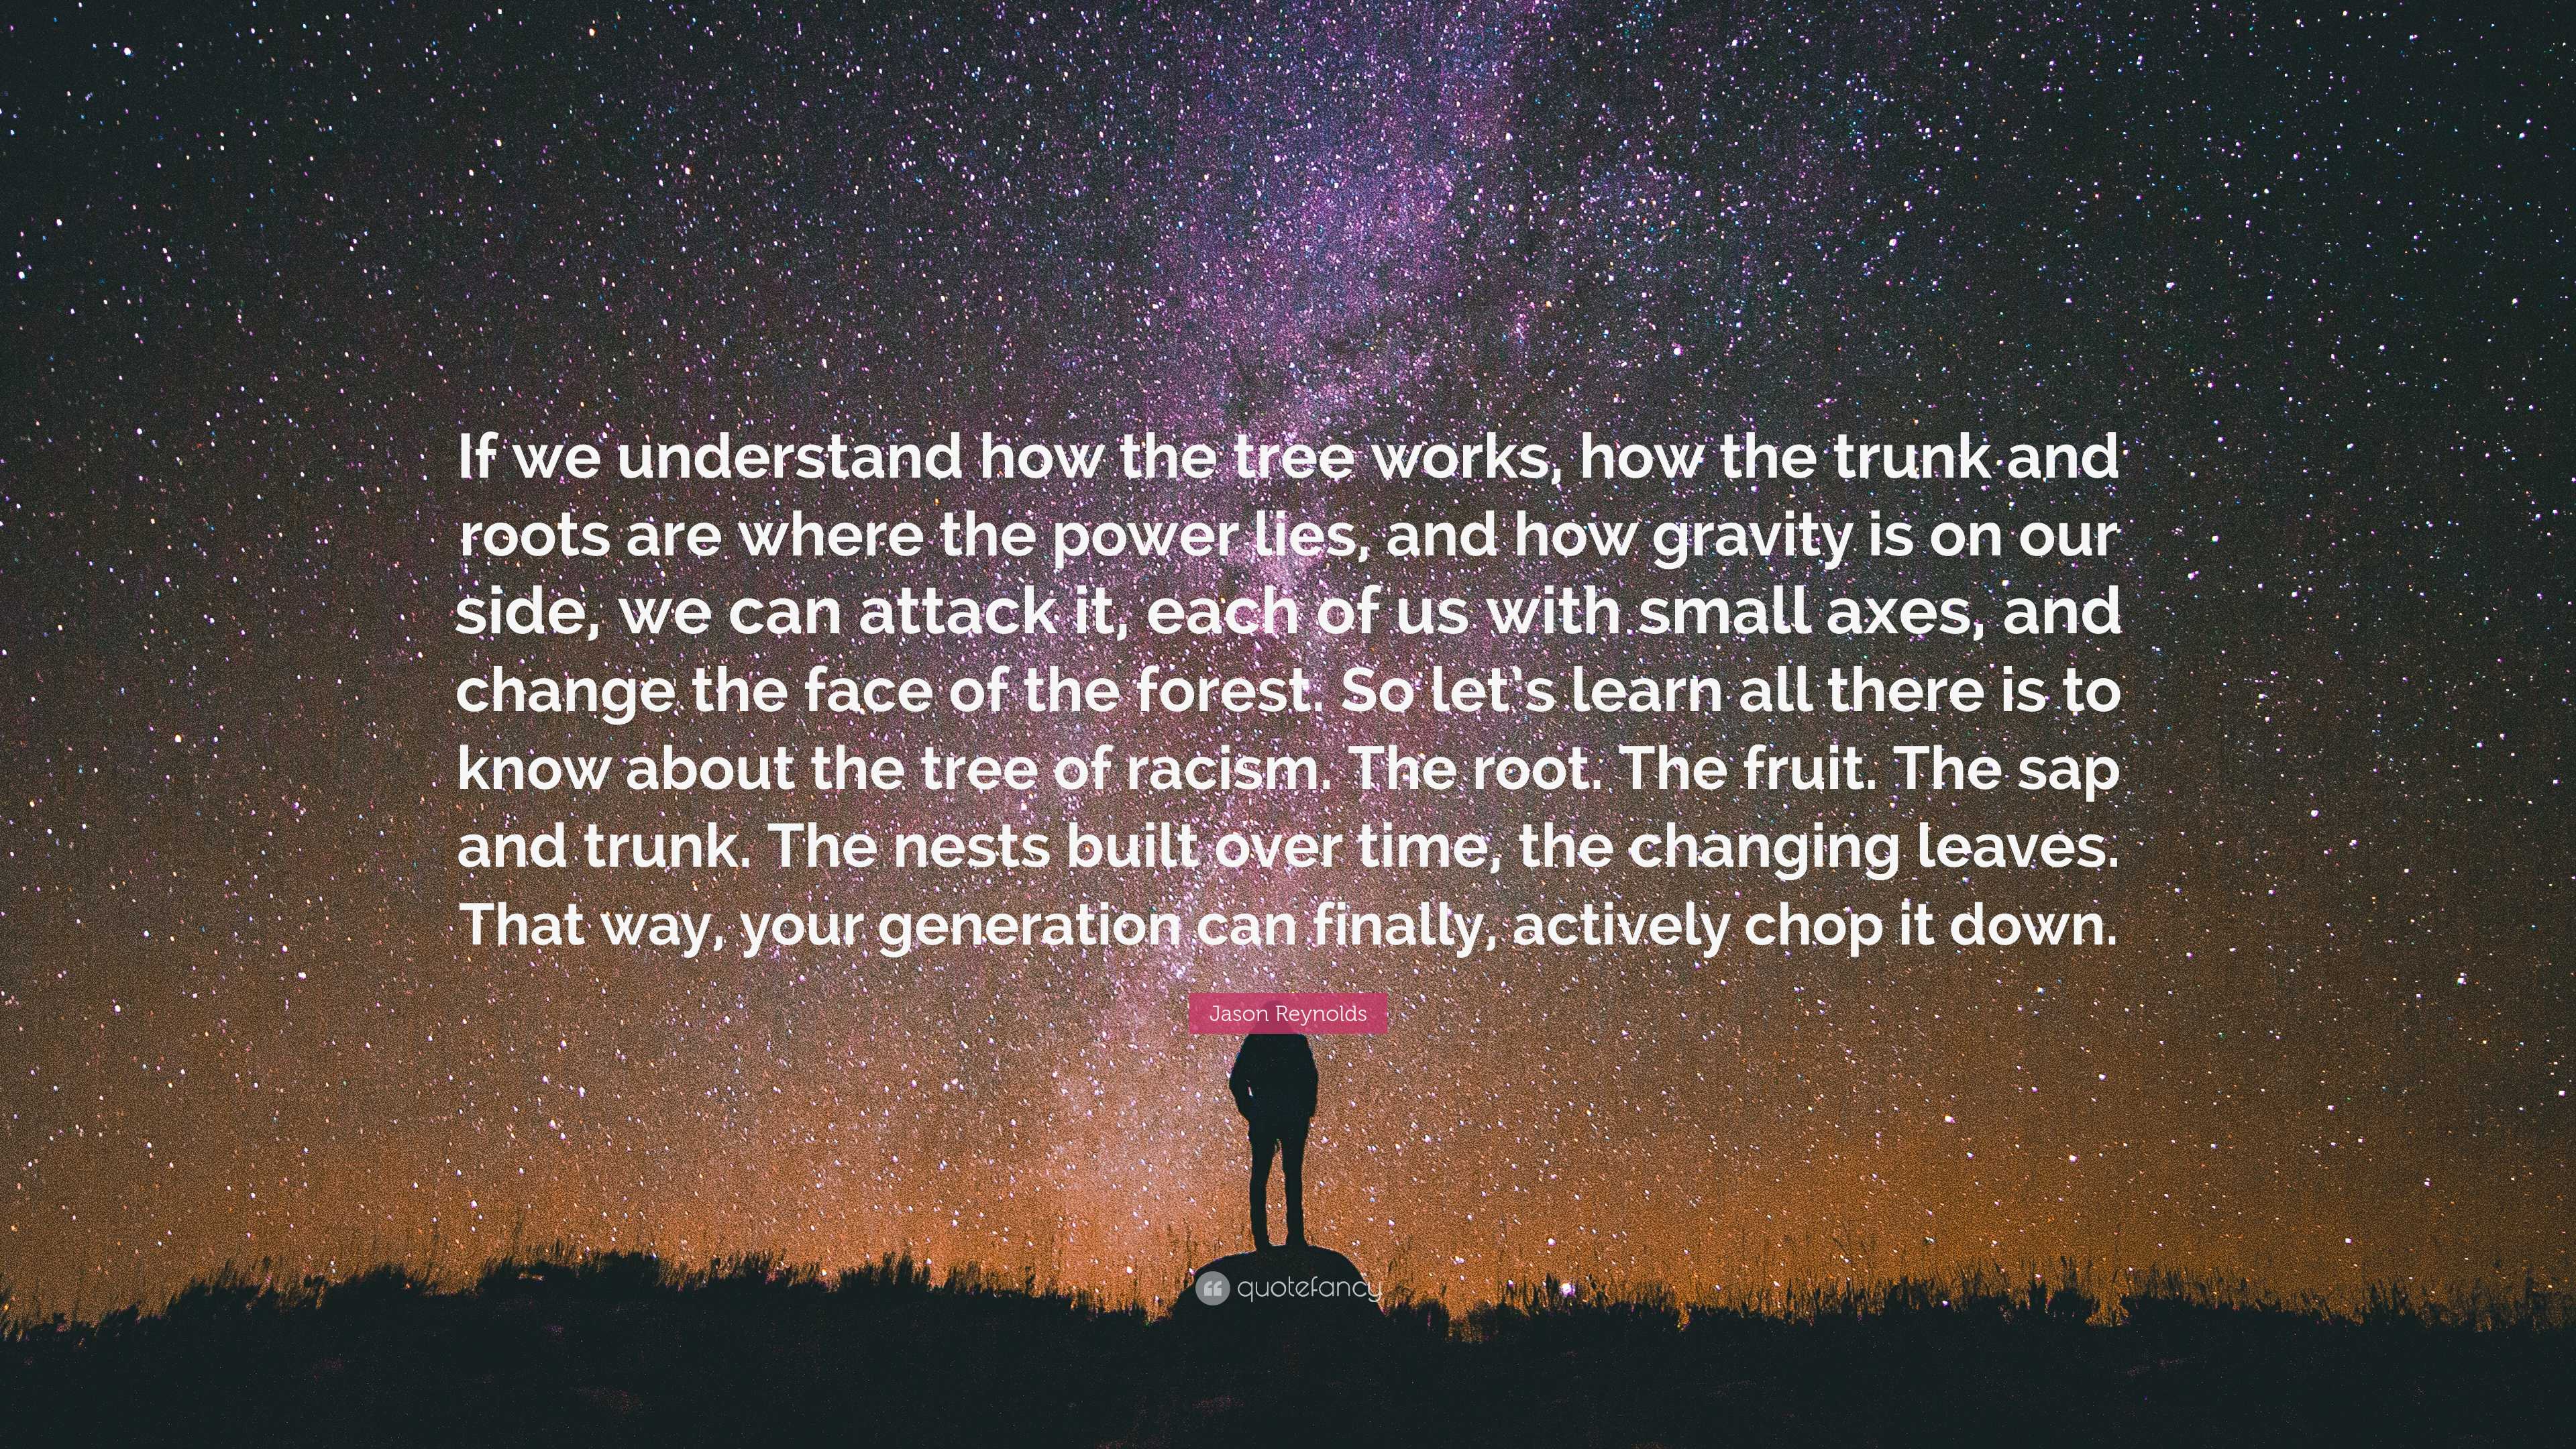 https://quotefancy.com/media/wallpaper/3840x2160/8011005-Jason-Reynolds-Quote-If-we-understand-how-the-tree-works-how-the.jpg